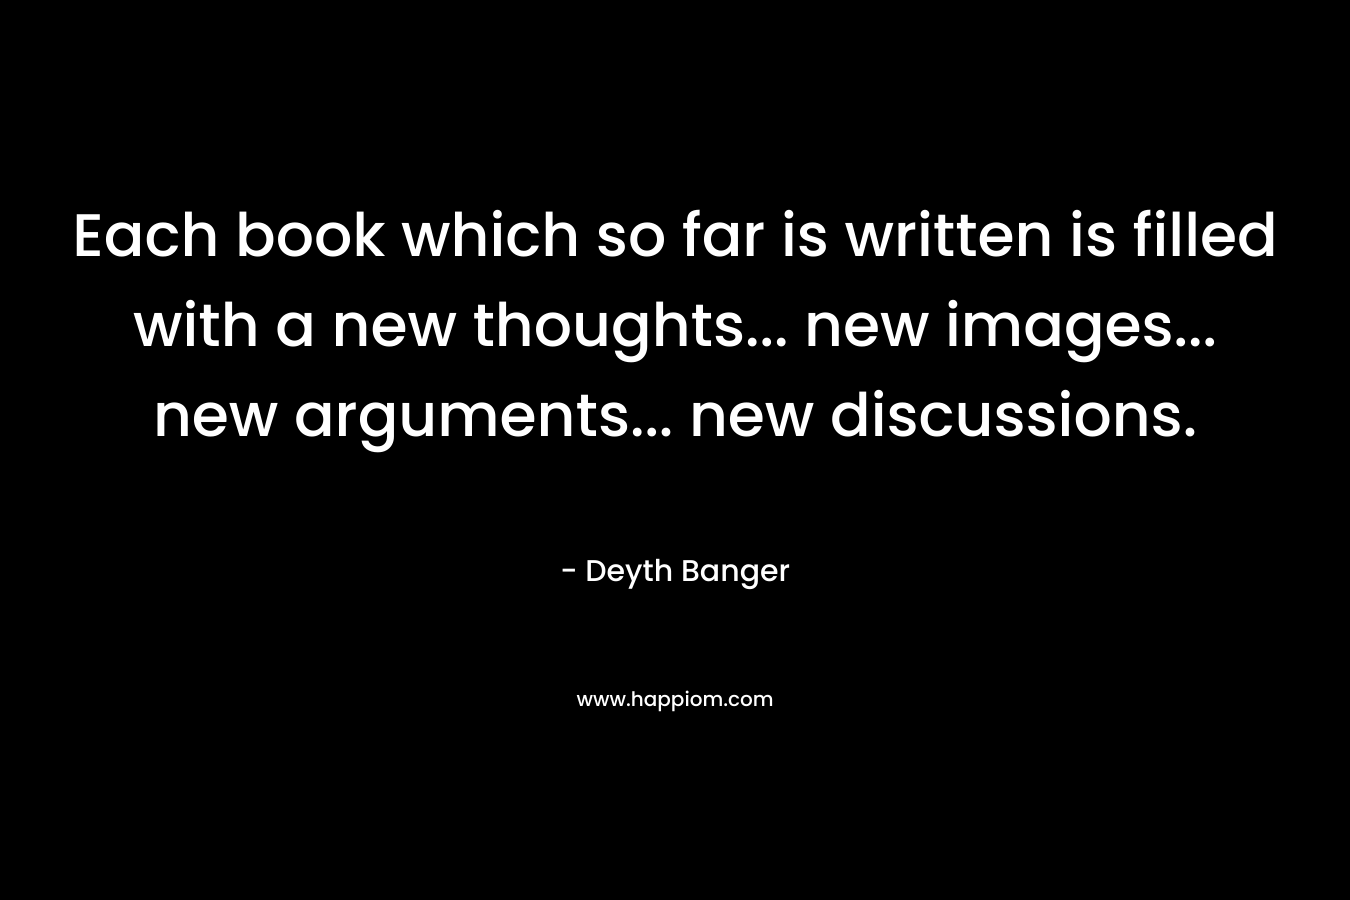 Each book which so far is written is filled with a new thoughts… new images… new arguments… new discussions. – Deyth Banger